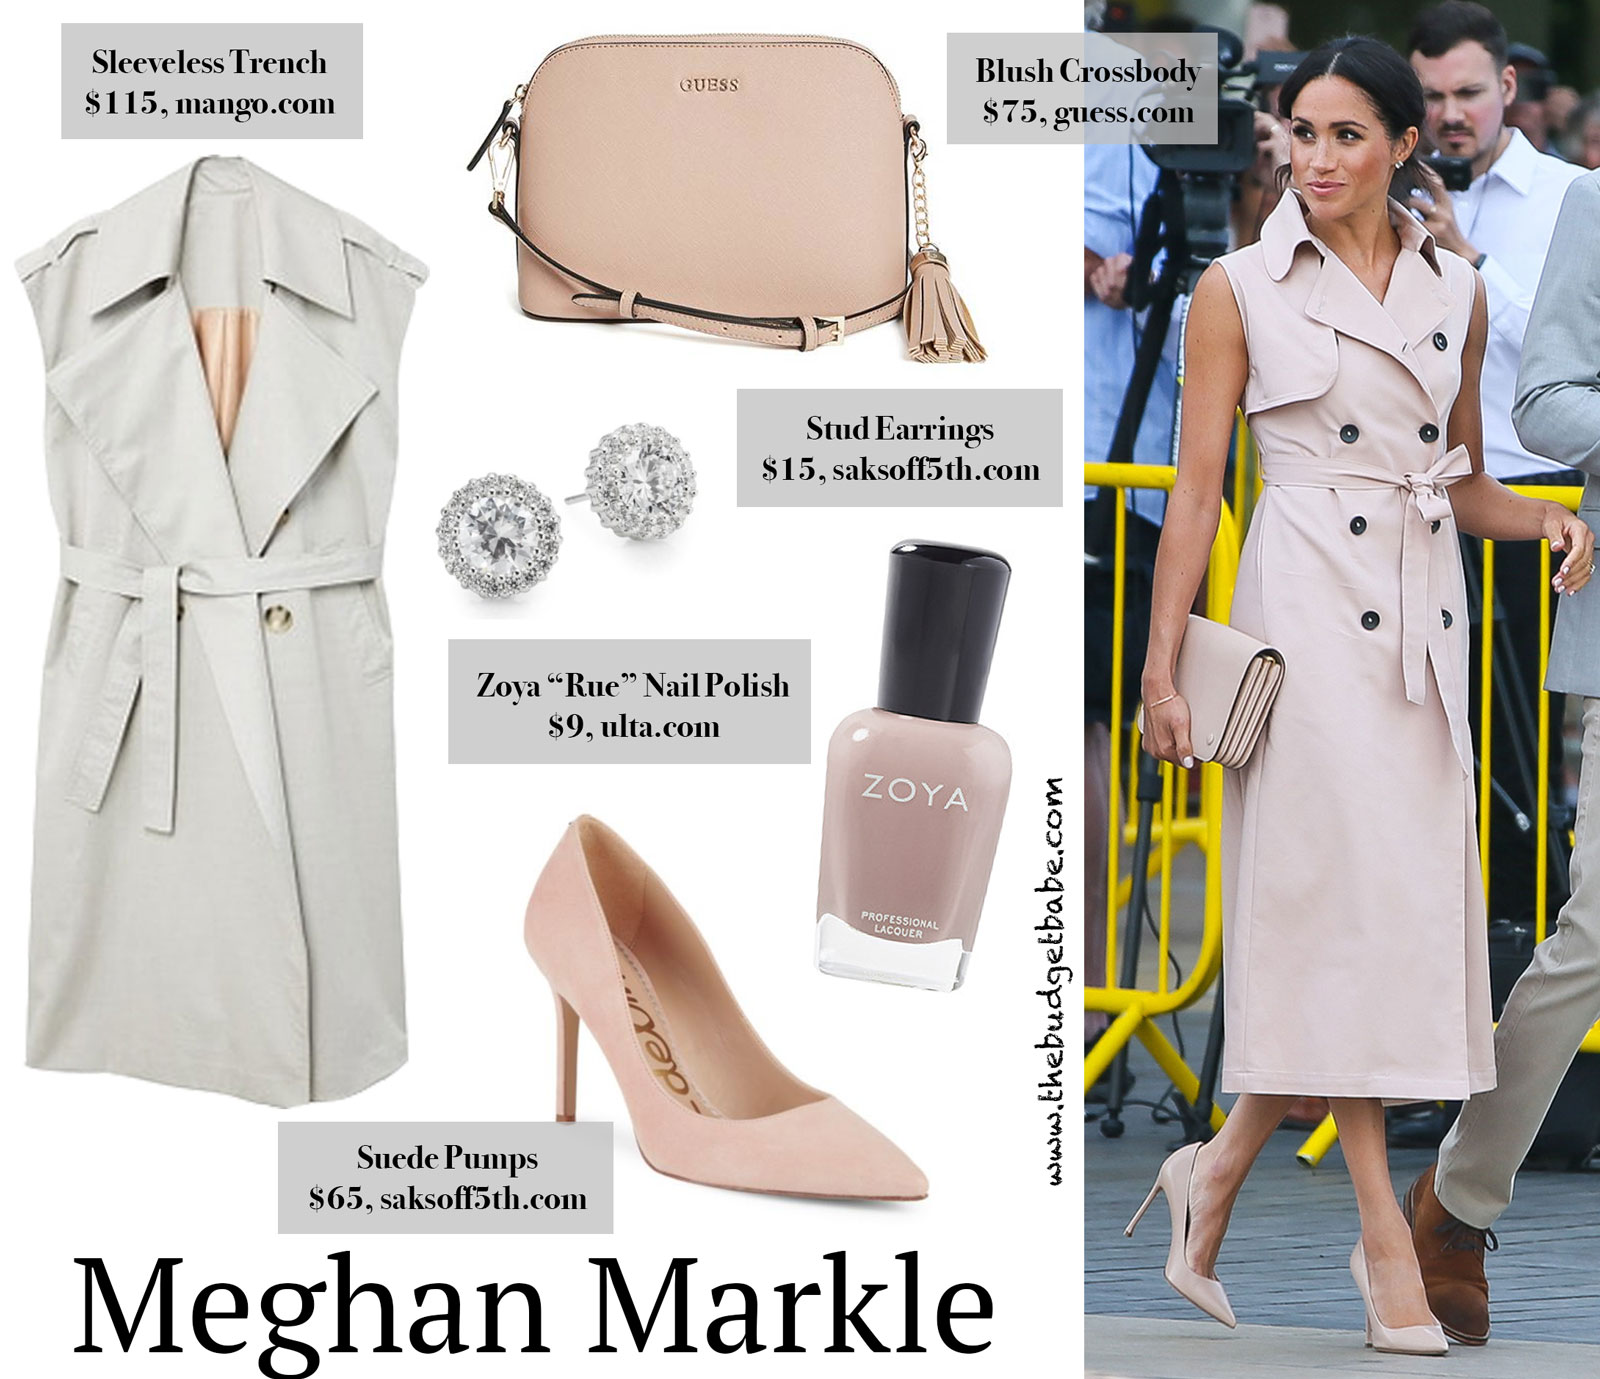 Meghan Markle's Sleeveless Trench Dress Look for Less